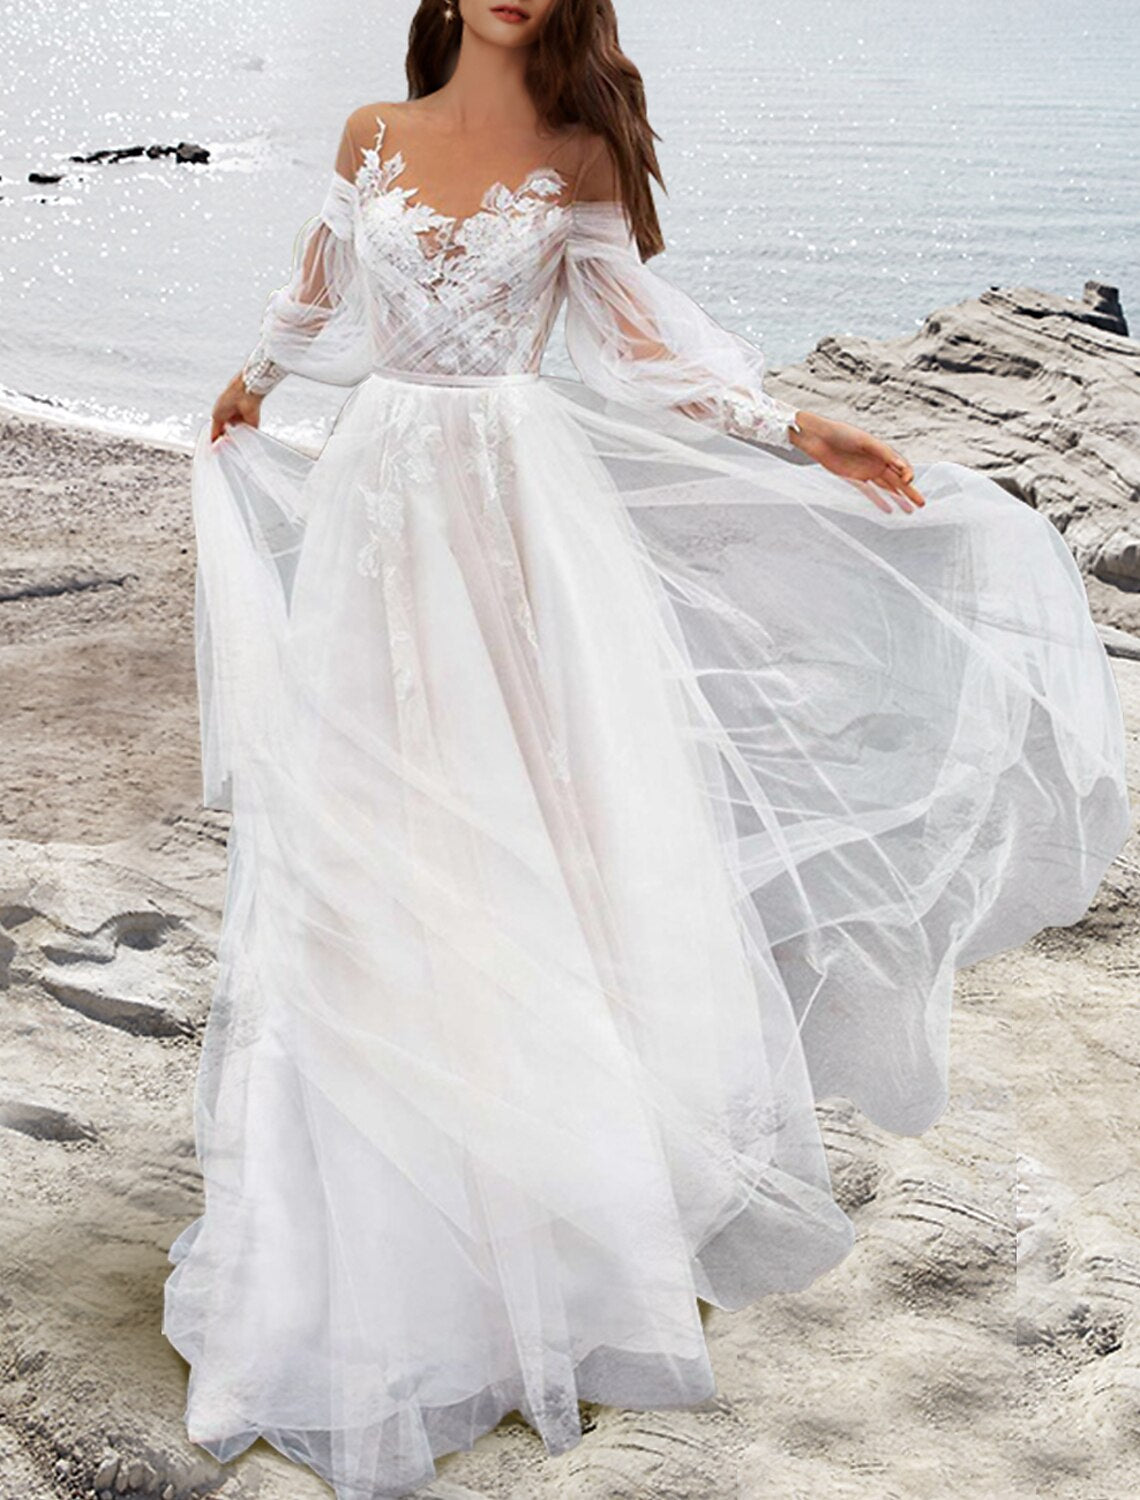 Wholesa Beach Wedding Dresses A-Line Off Shoulder Long Sleeve Sweep / Brush Train Lace Bridal Gowns With Pleats Appliques